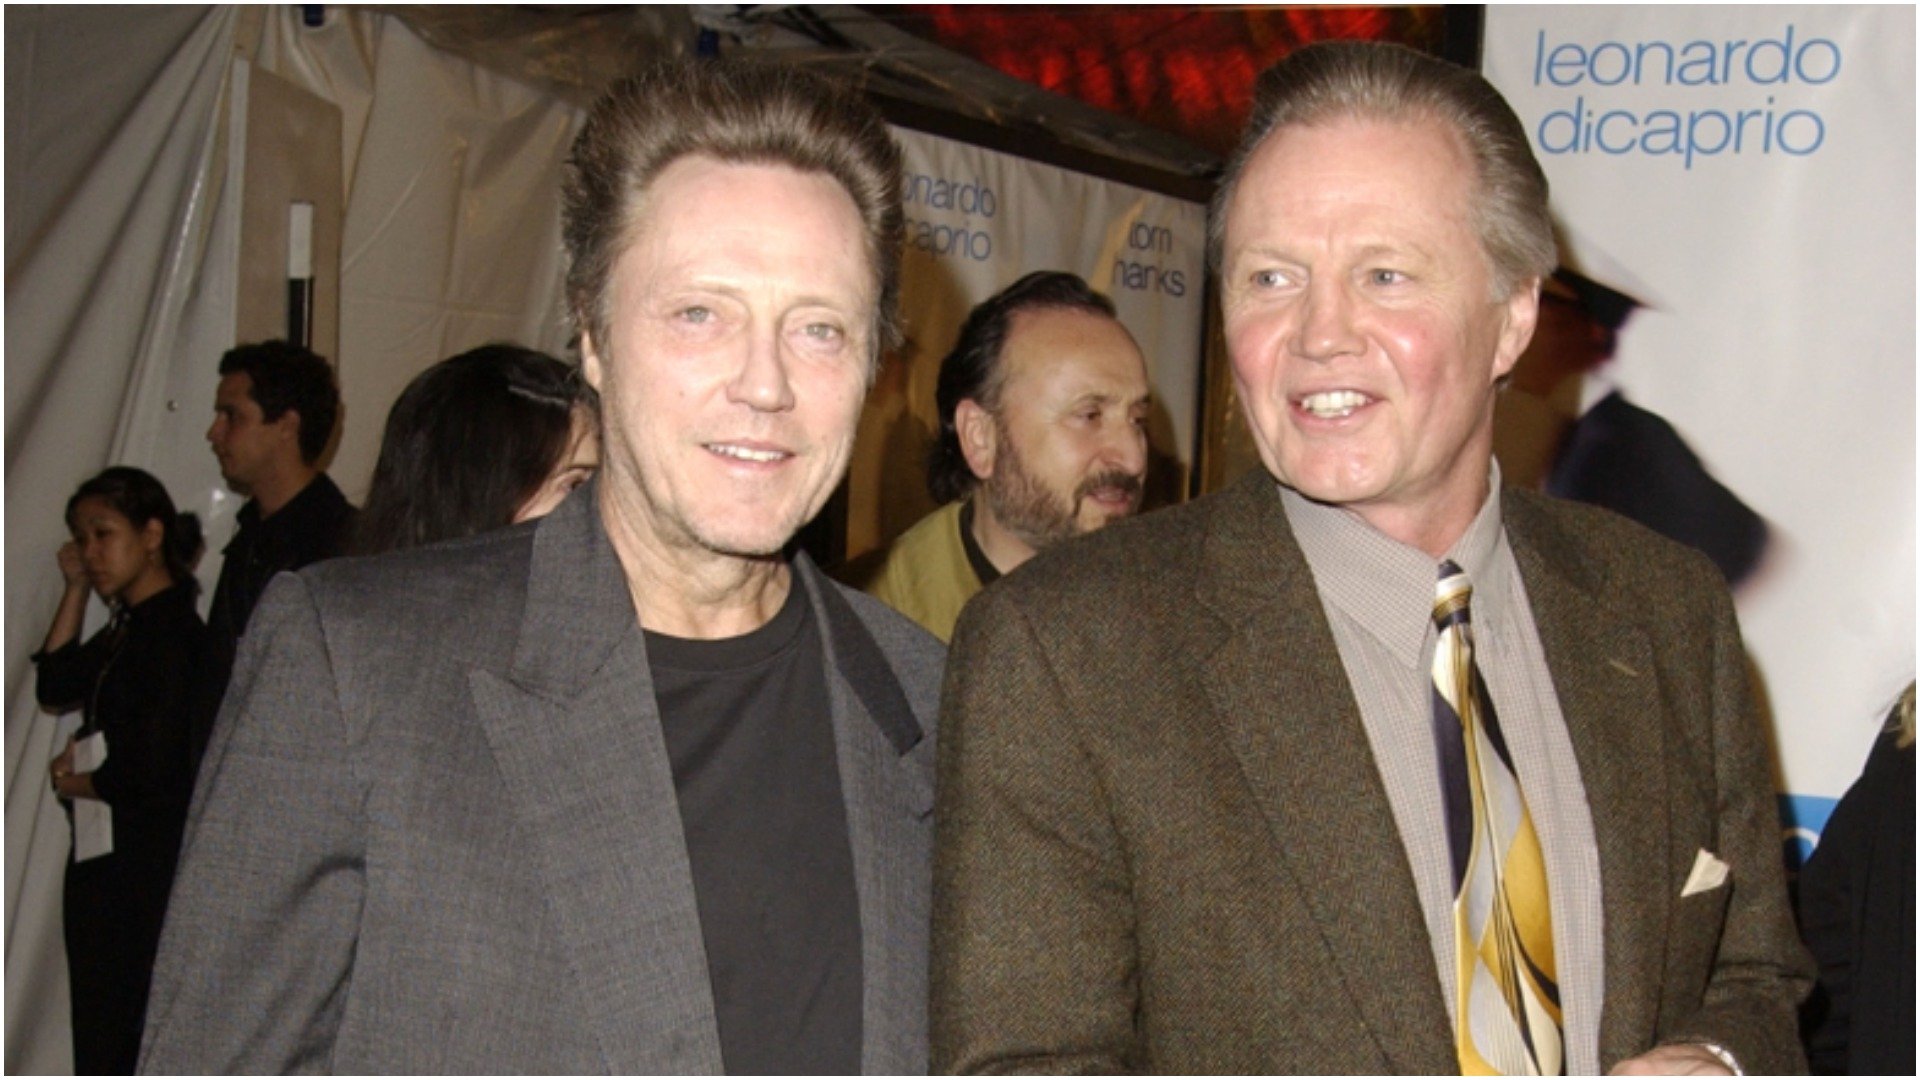 Christopher Walken and Jon Voight during 'Catch Me If You Can' premiere